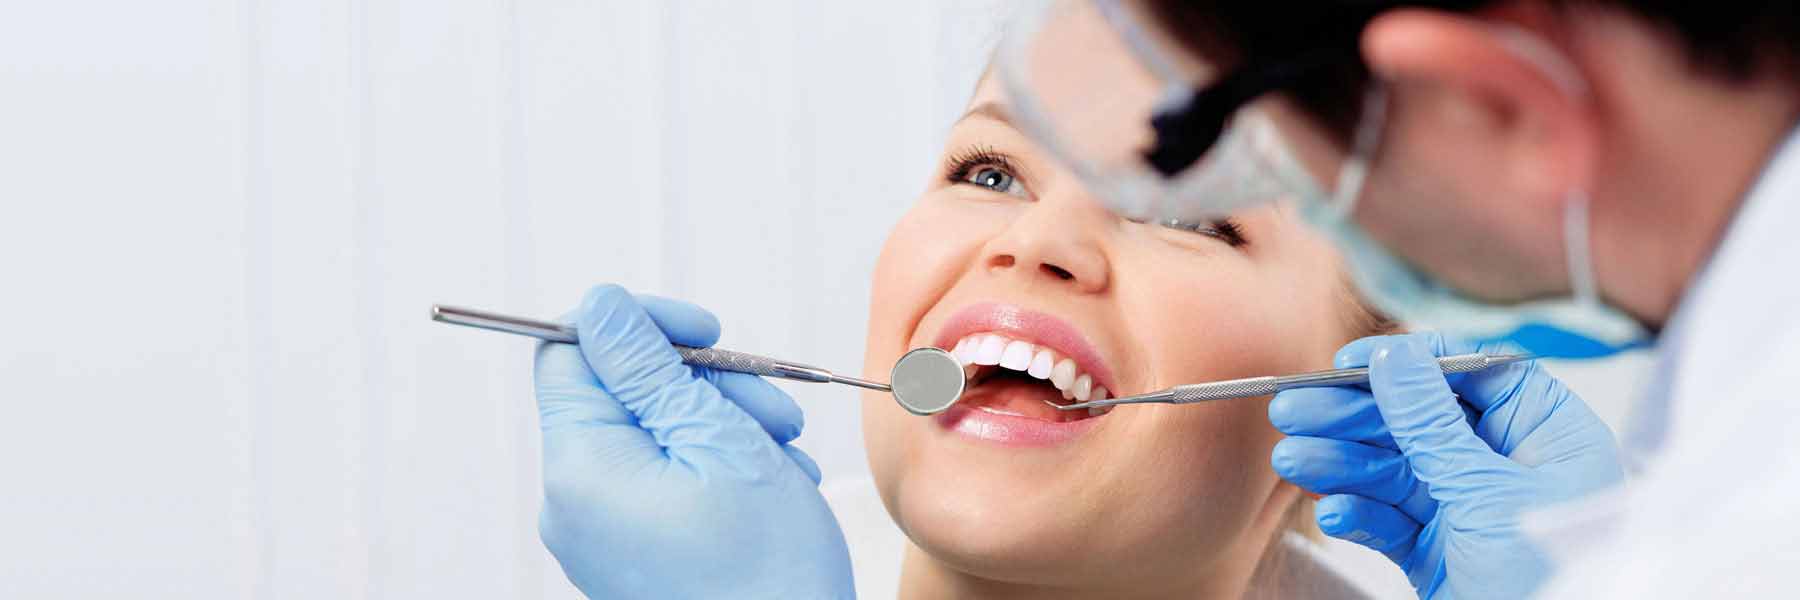 Dental Service in Oakhampton - Tooth N Care